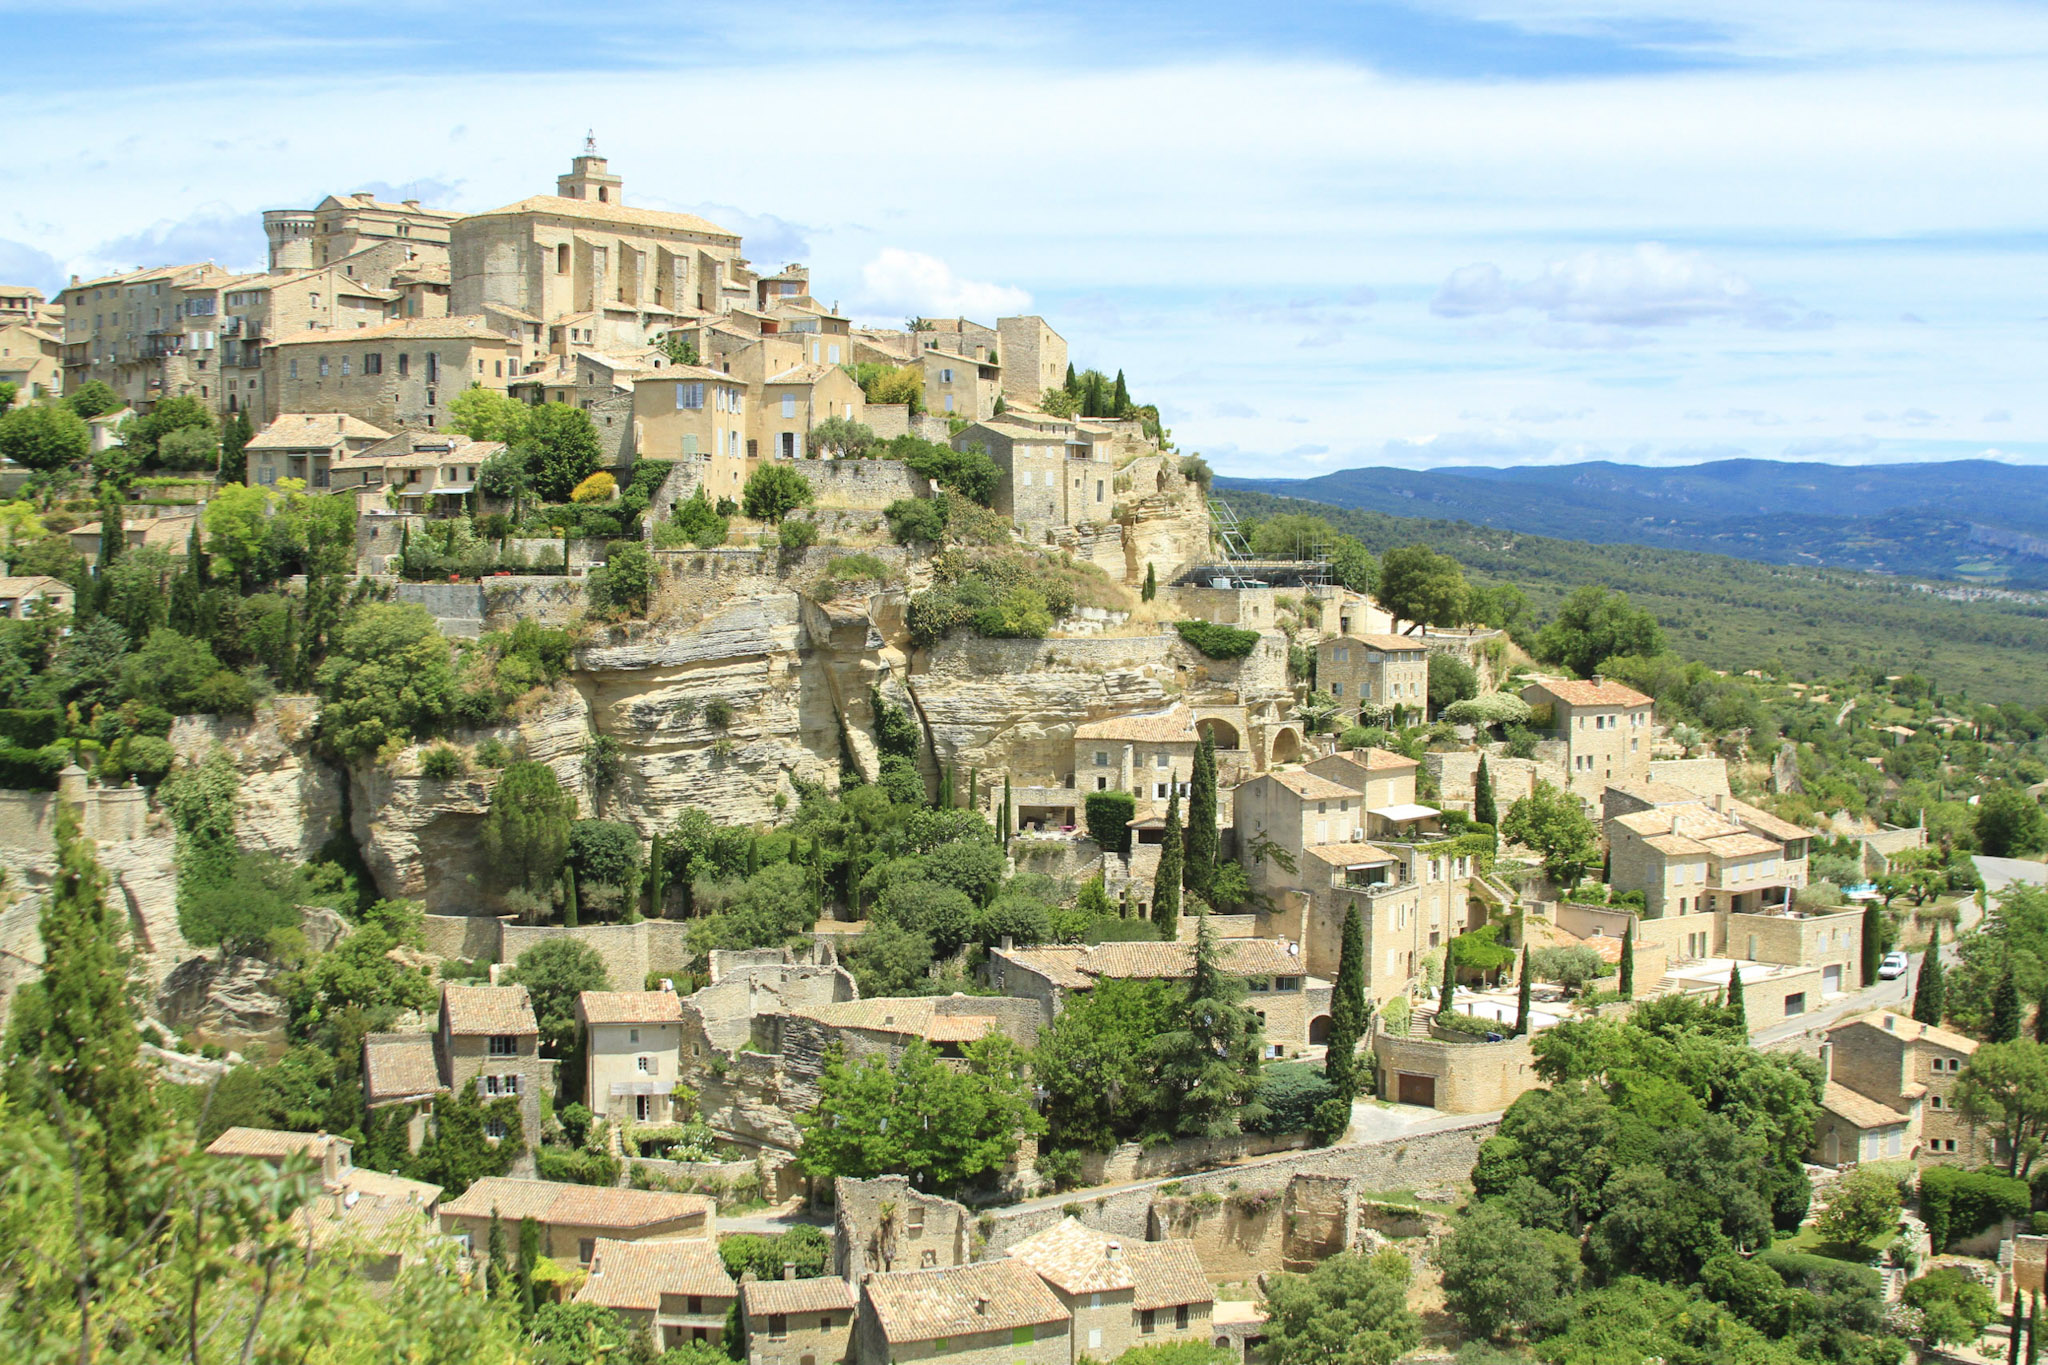 "Possibly the most well-known town of the Luberon region, Gordes is a great place to start exploring Provence. It's certainly more posh and built up than its neighbors, and is very popular, so be sure to arrive early in the day...." | #mfrancisdesig…